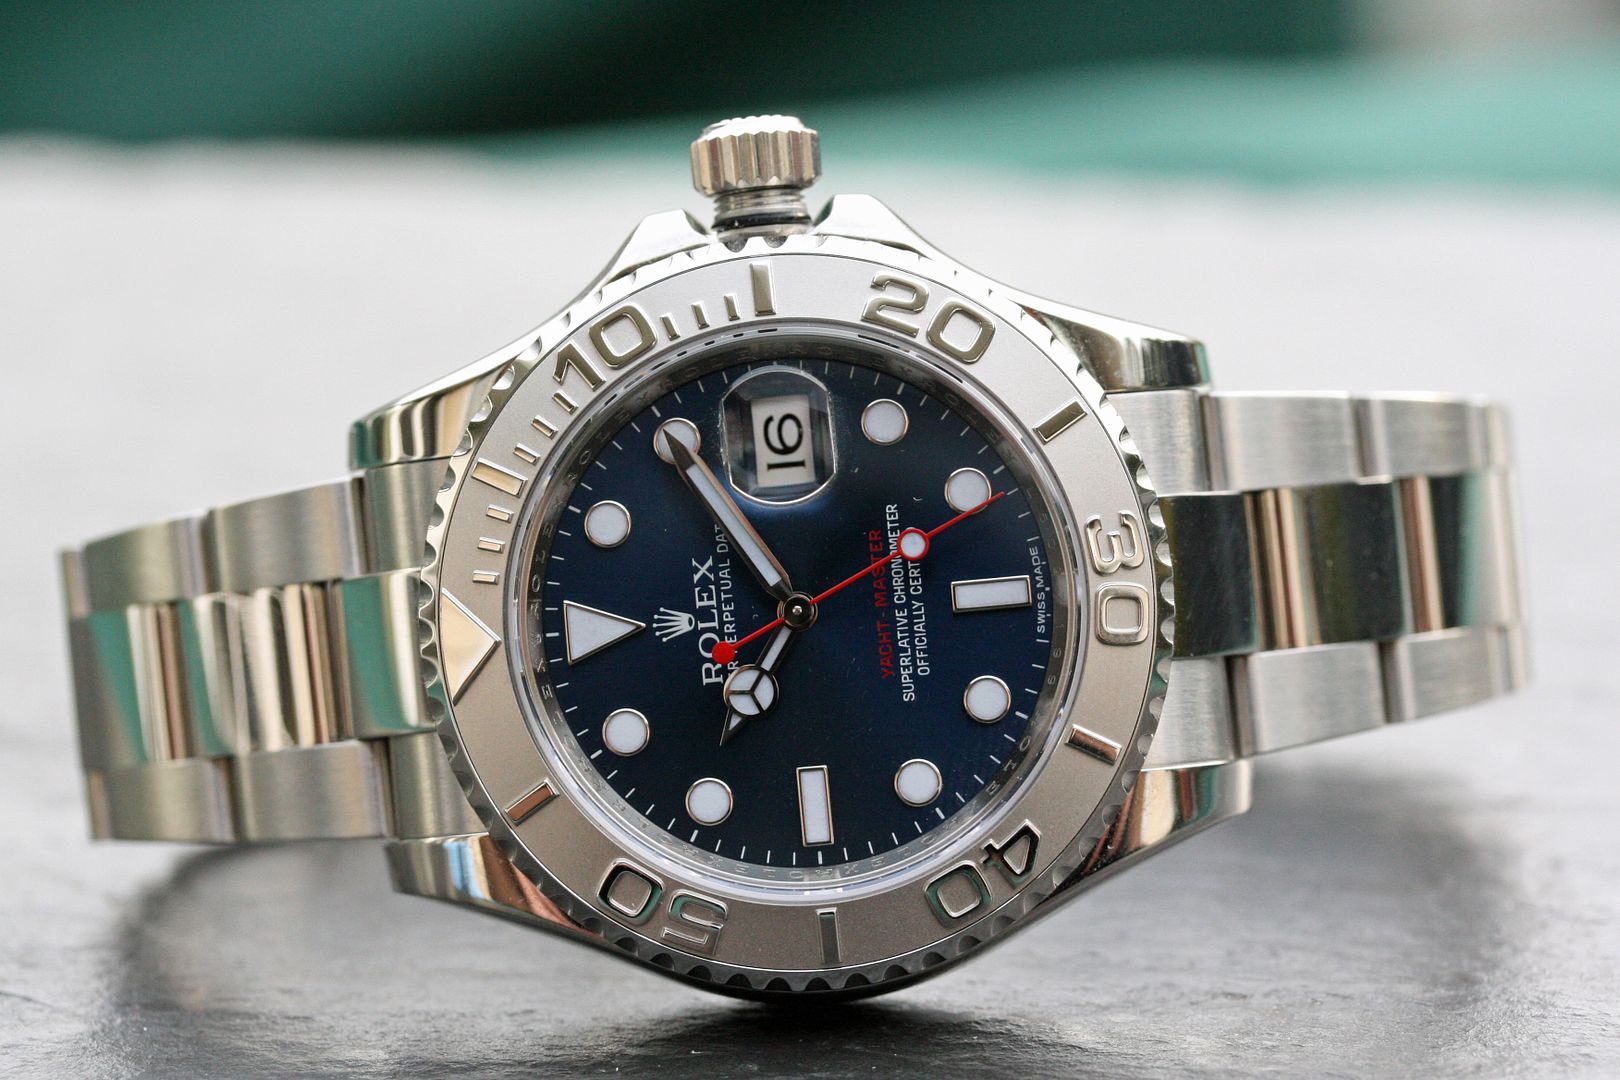 Green Sub 116610LV or Blue Yachtmaster 116622?